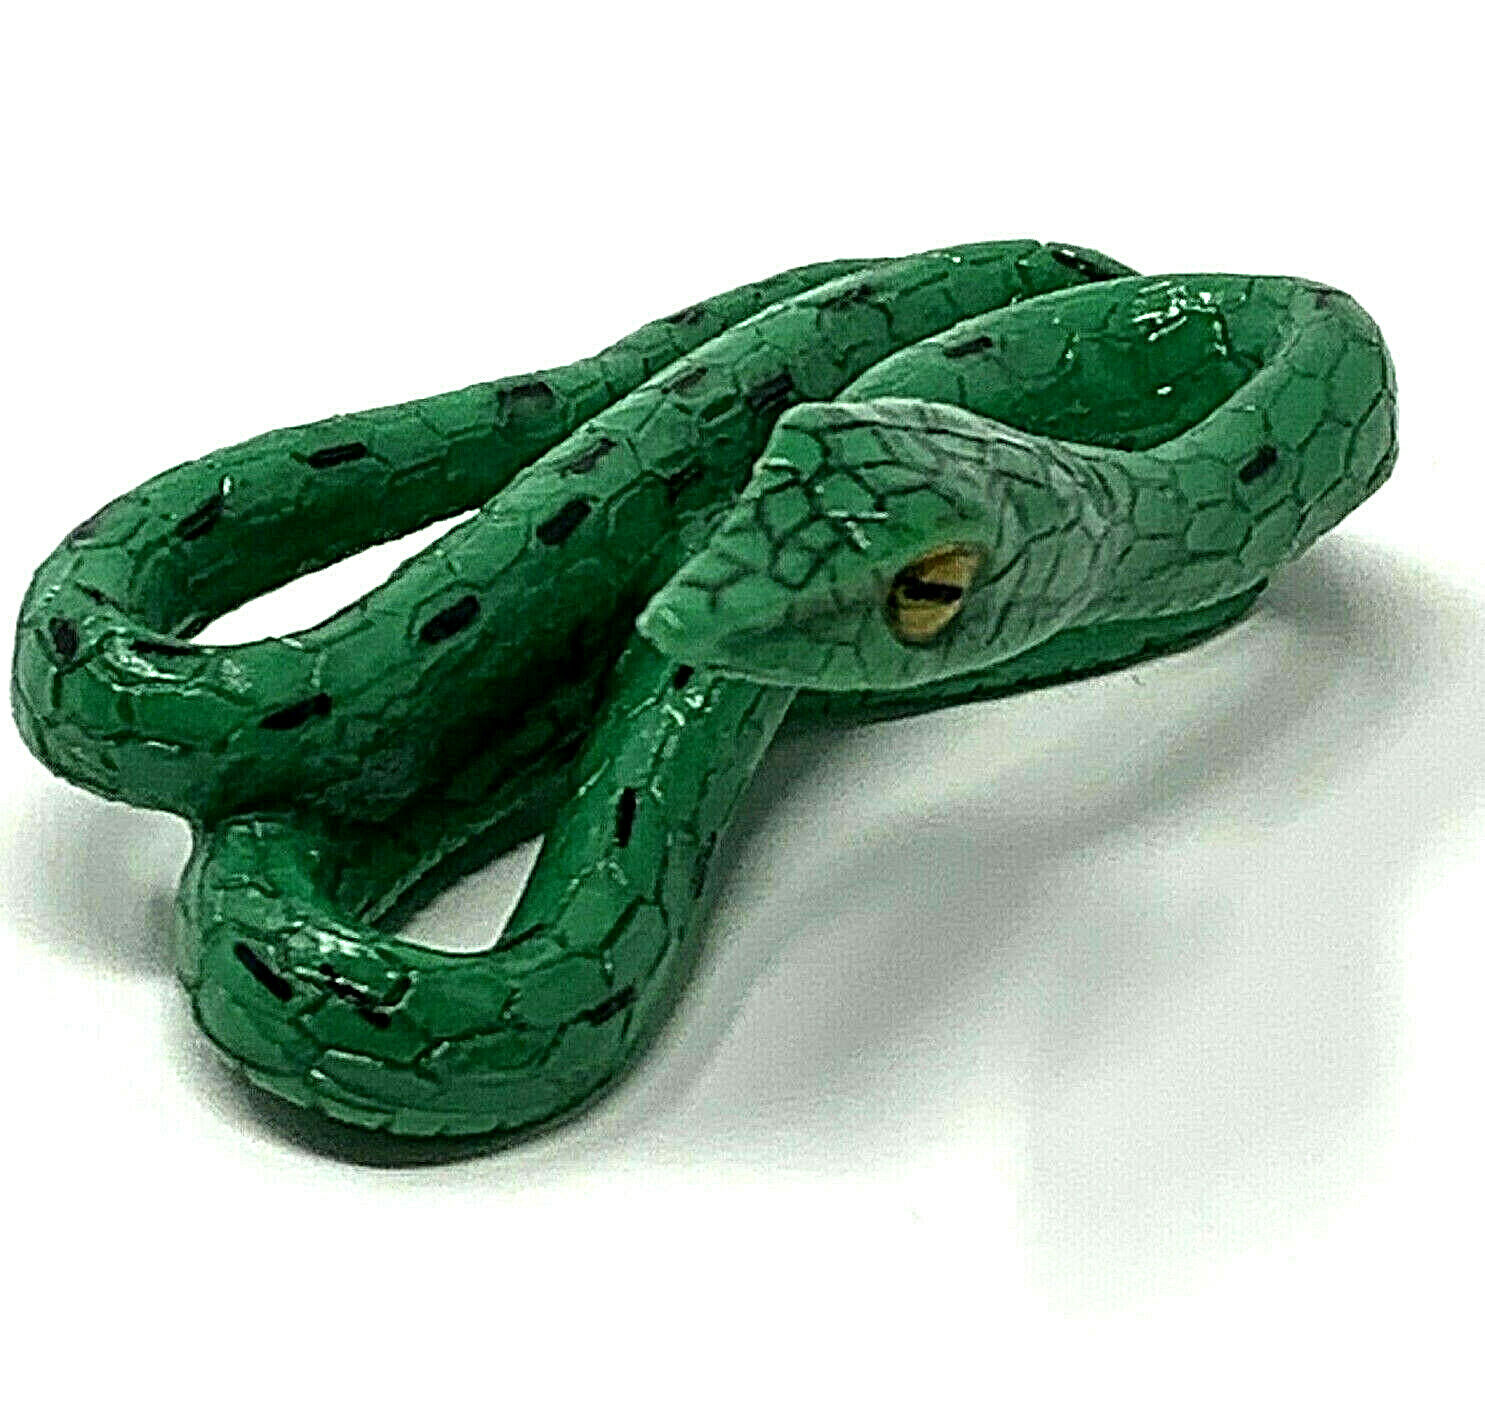 YOWIE Green Vine Snake Toy Colors of the Kingdom Collection 2\